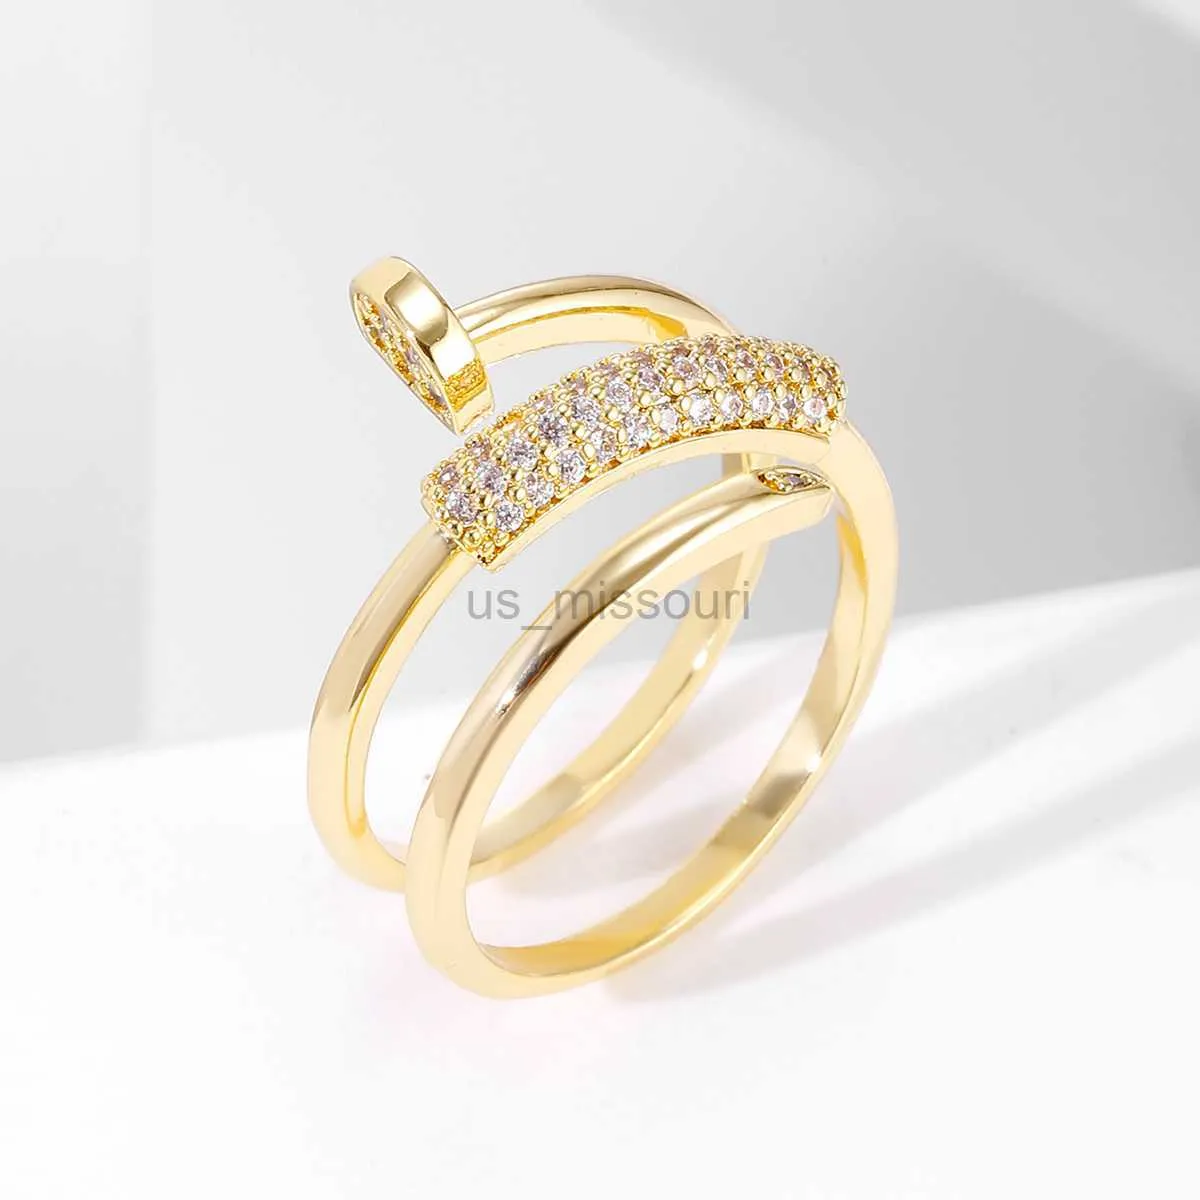 Band Rings Korea New Fashion Jewelry Exquisite 18K Real Gold Plated AAA Zircon Ring Elegant Women's Opening Adjustable Wedding Gift J230531